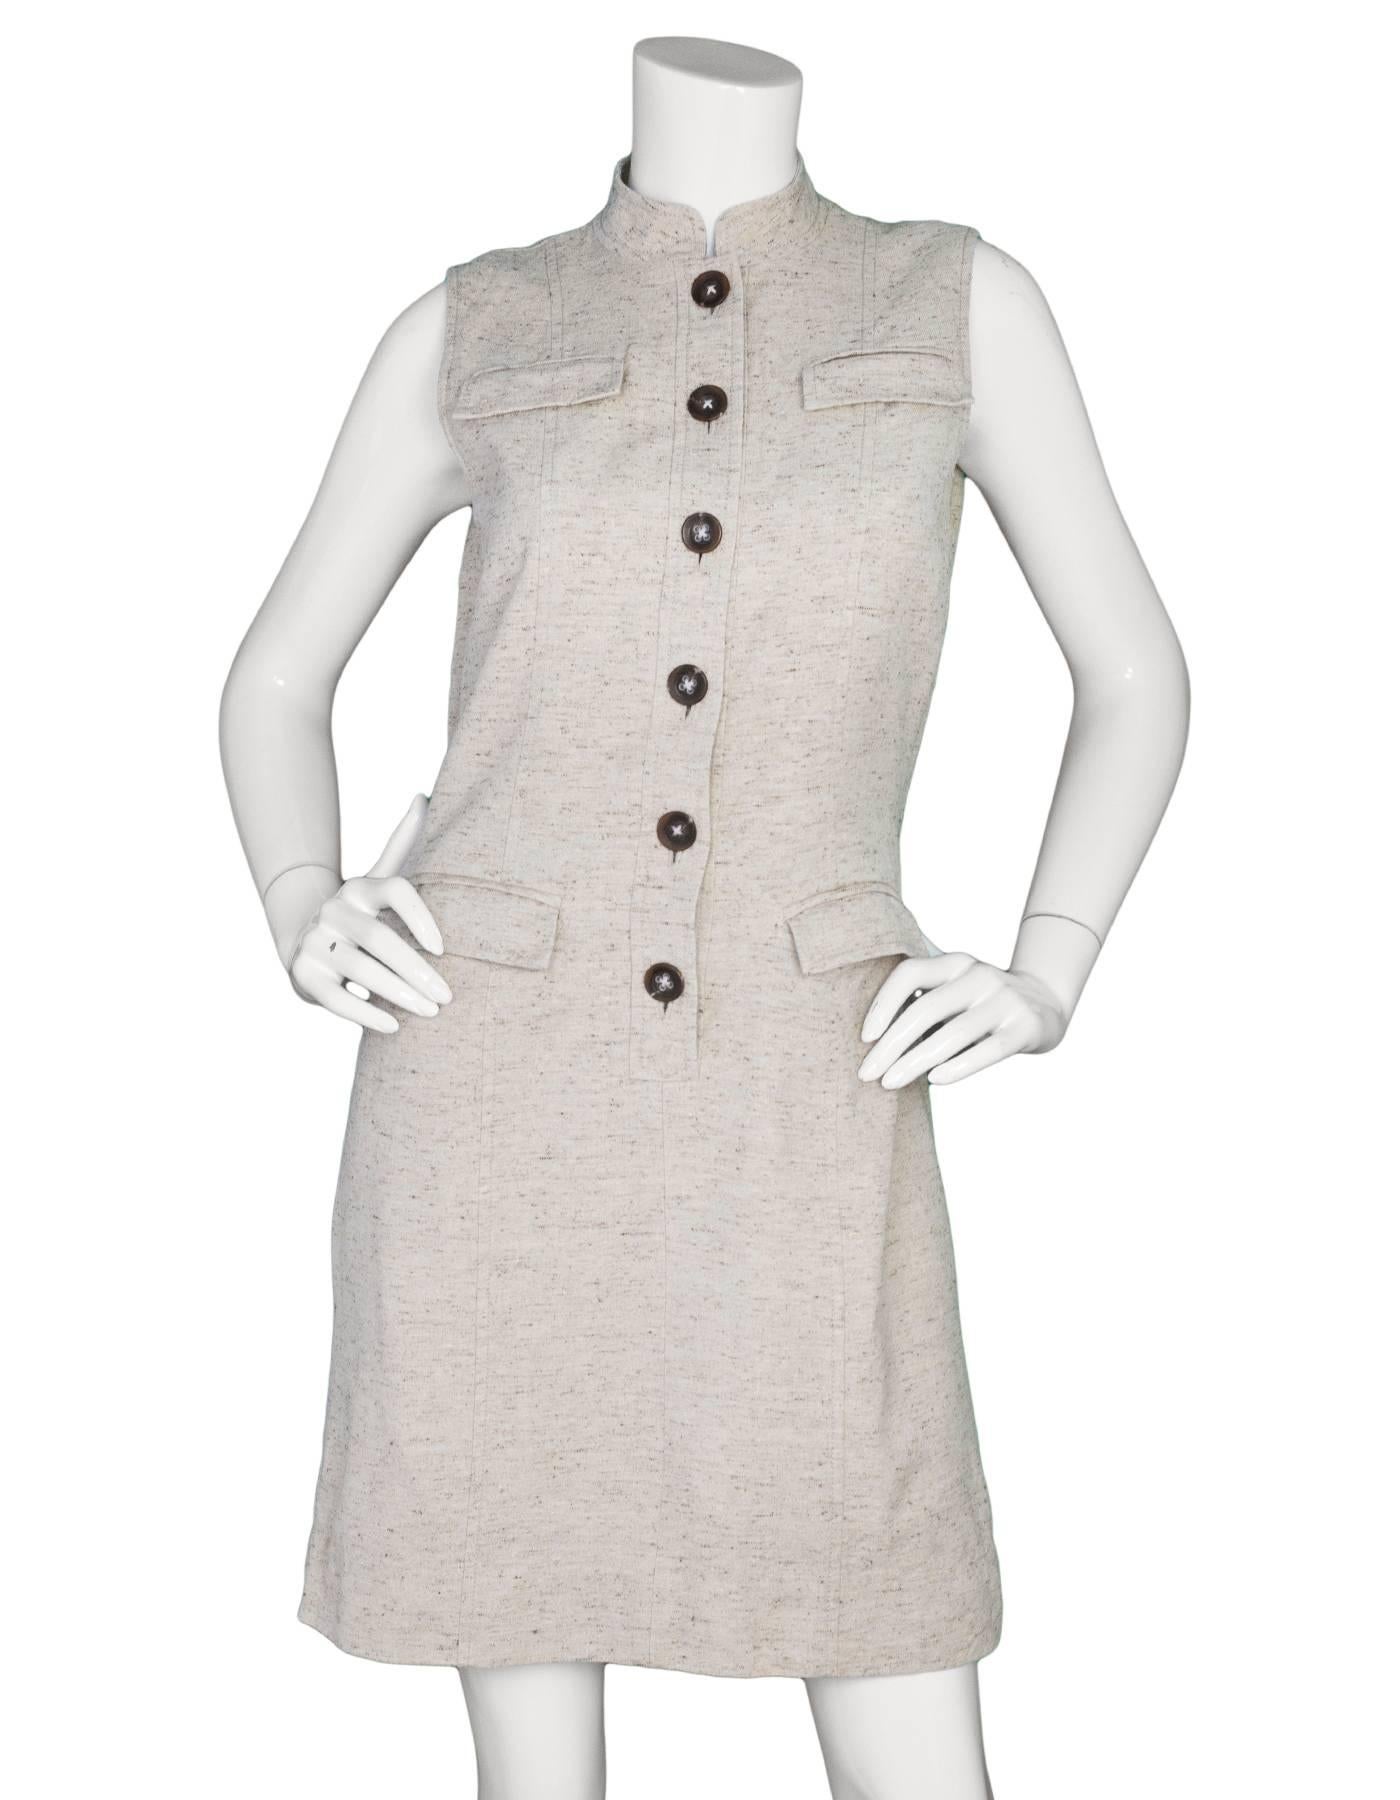 Oscar De La Renta Beige Wool & Silk Blend Sleeveless Dress Sz 10

Made In: Italy
Color: Beige
Composition: 56% wool, 44% silk
Lining: Beige textile
Closure/Opening: Front button closure
Exterior Pockets: Faux flap pockets at bust, flap pockets at